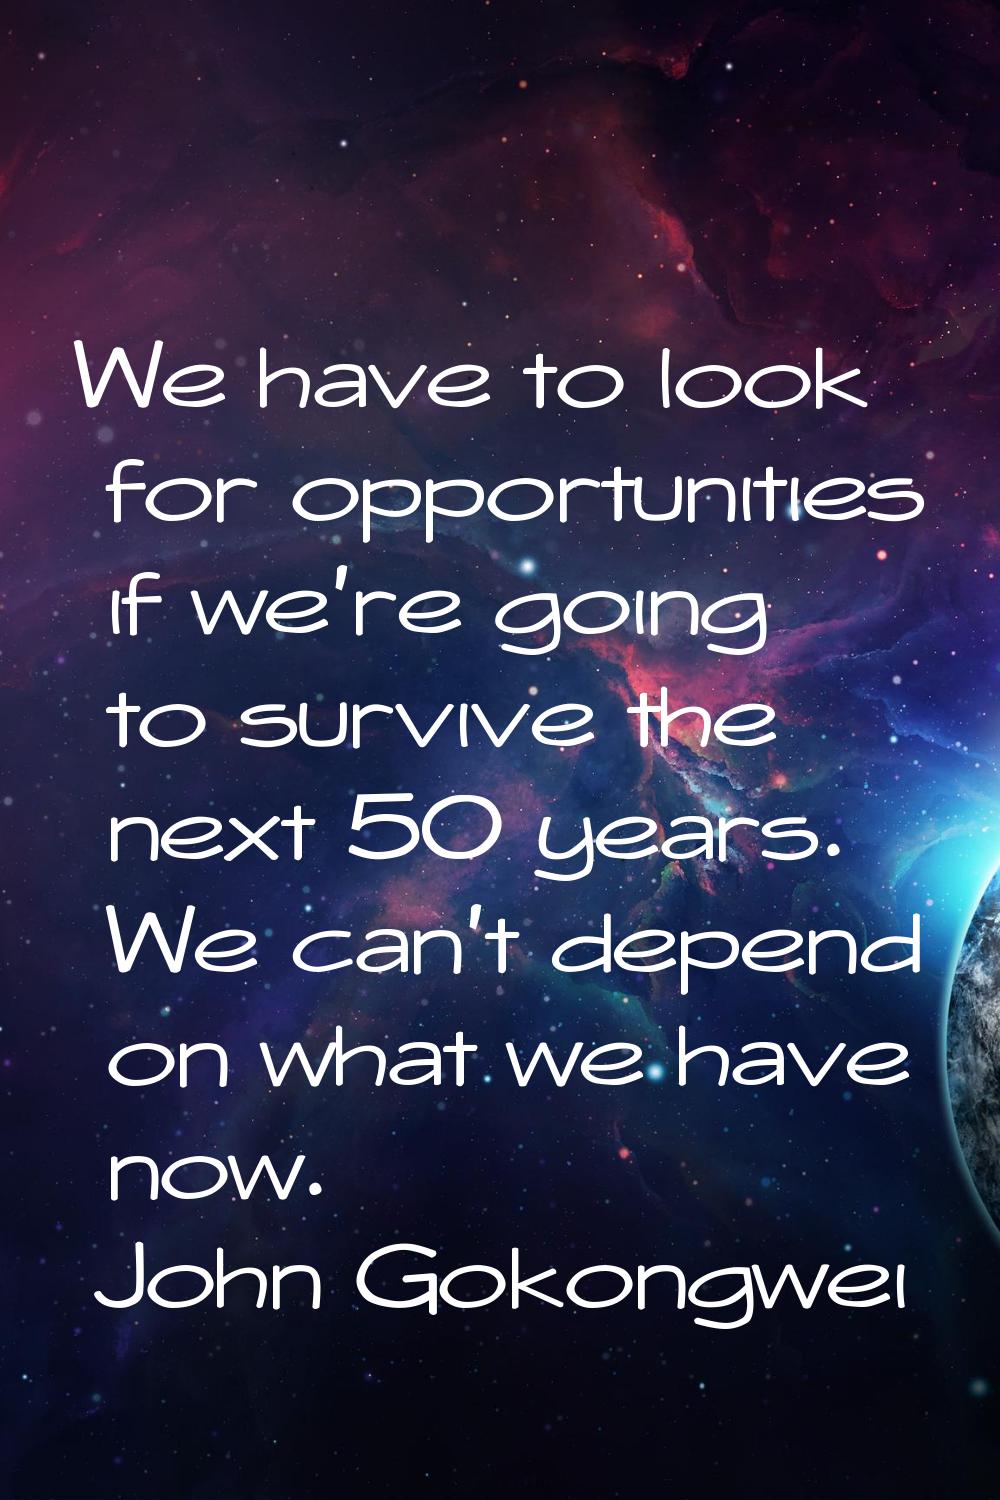 We have to look for opportunities if we're going to survive the next 50 years. We can't depend on w